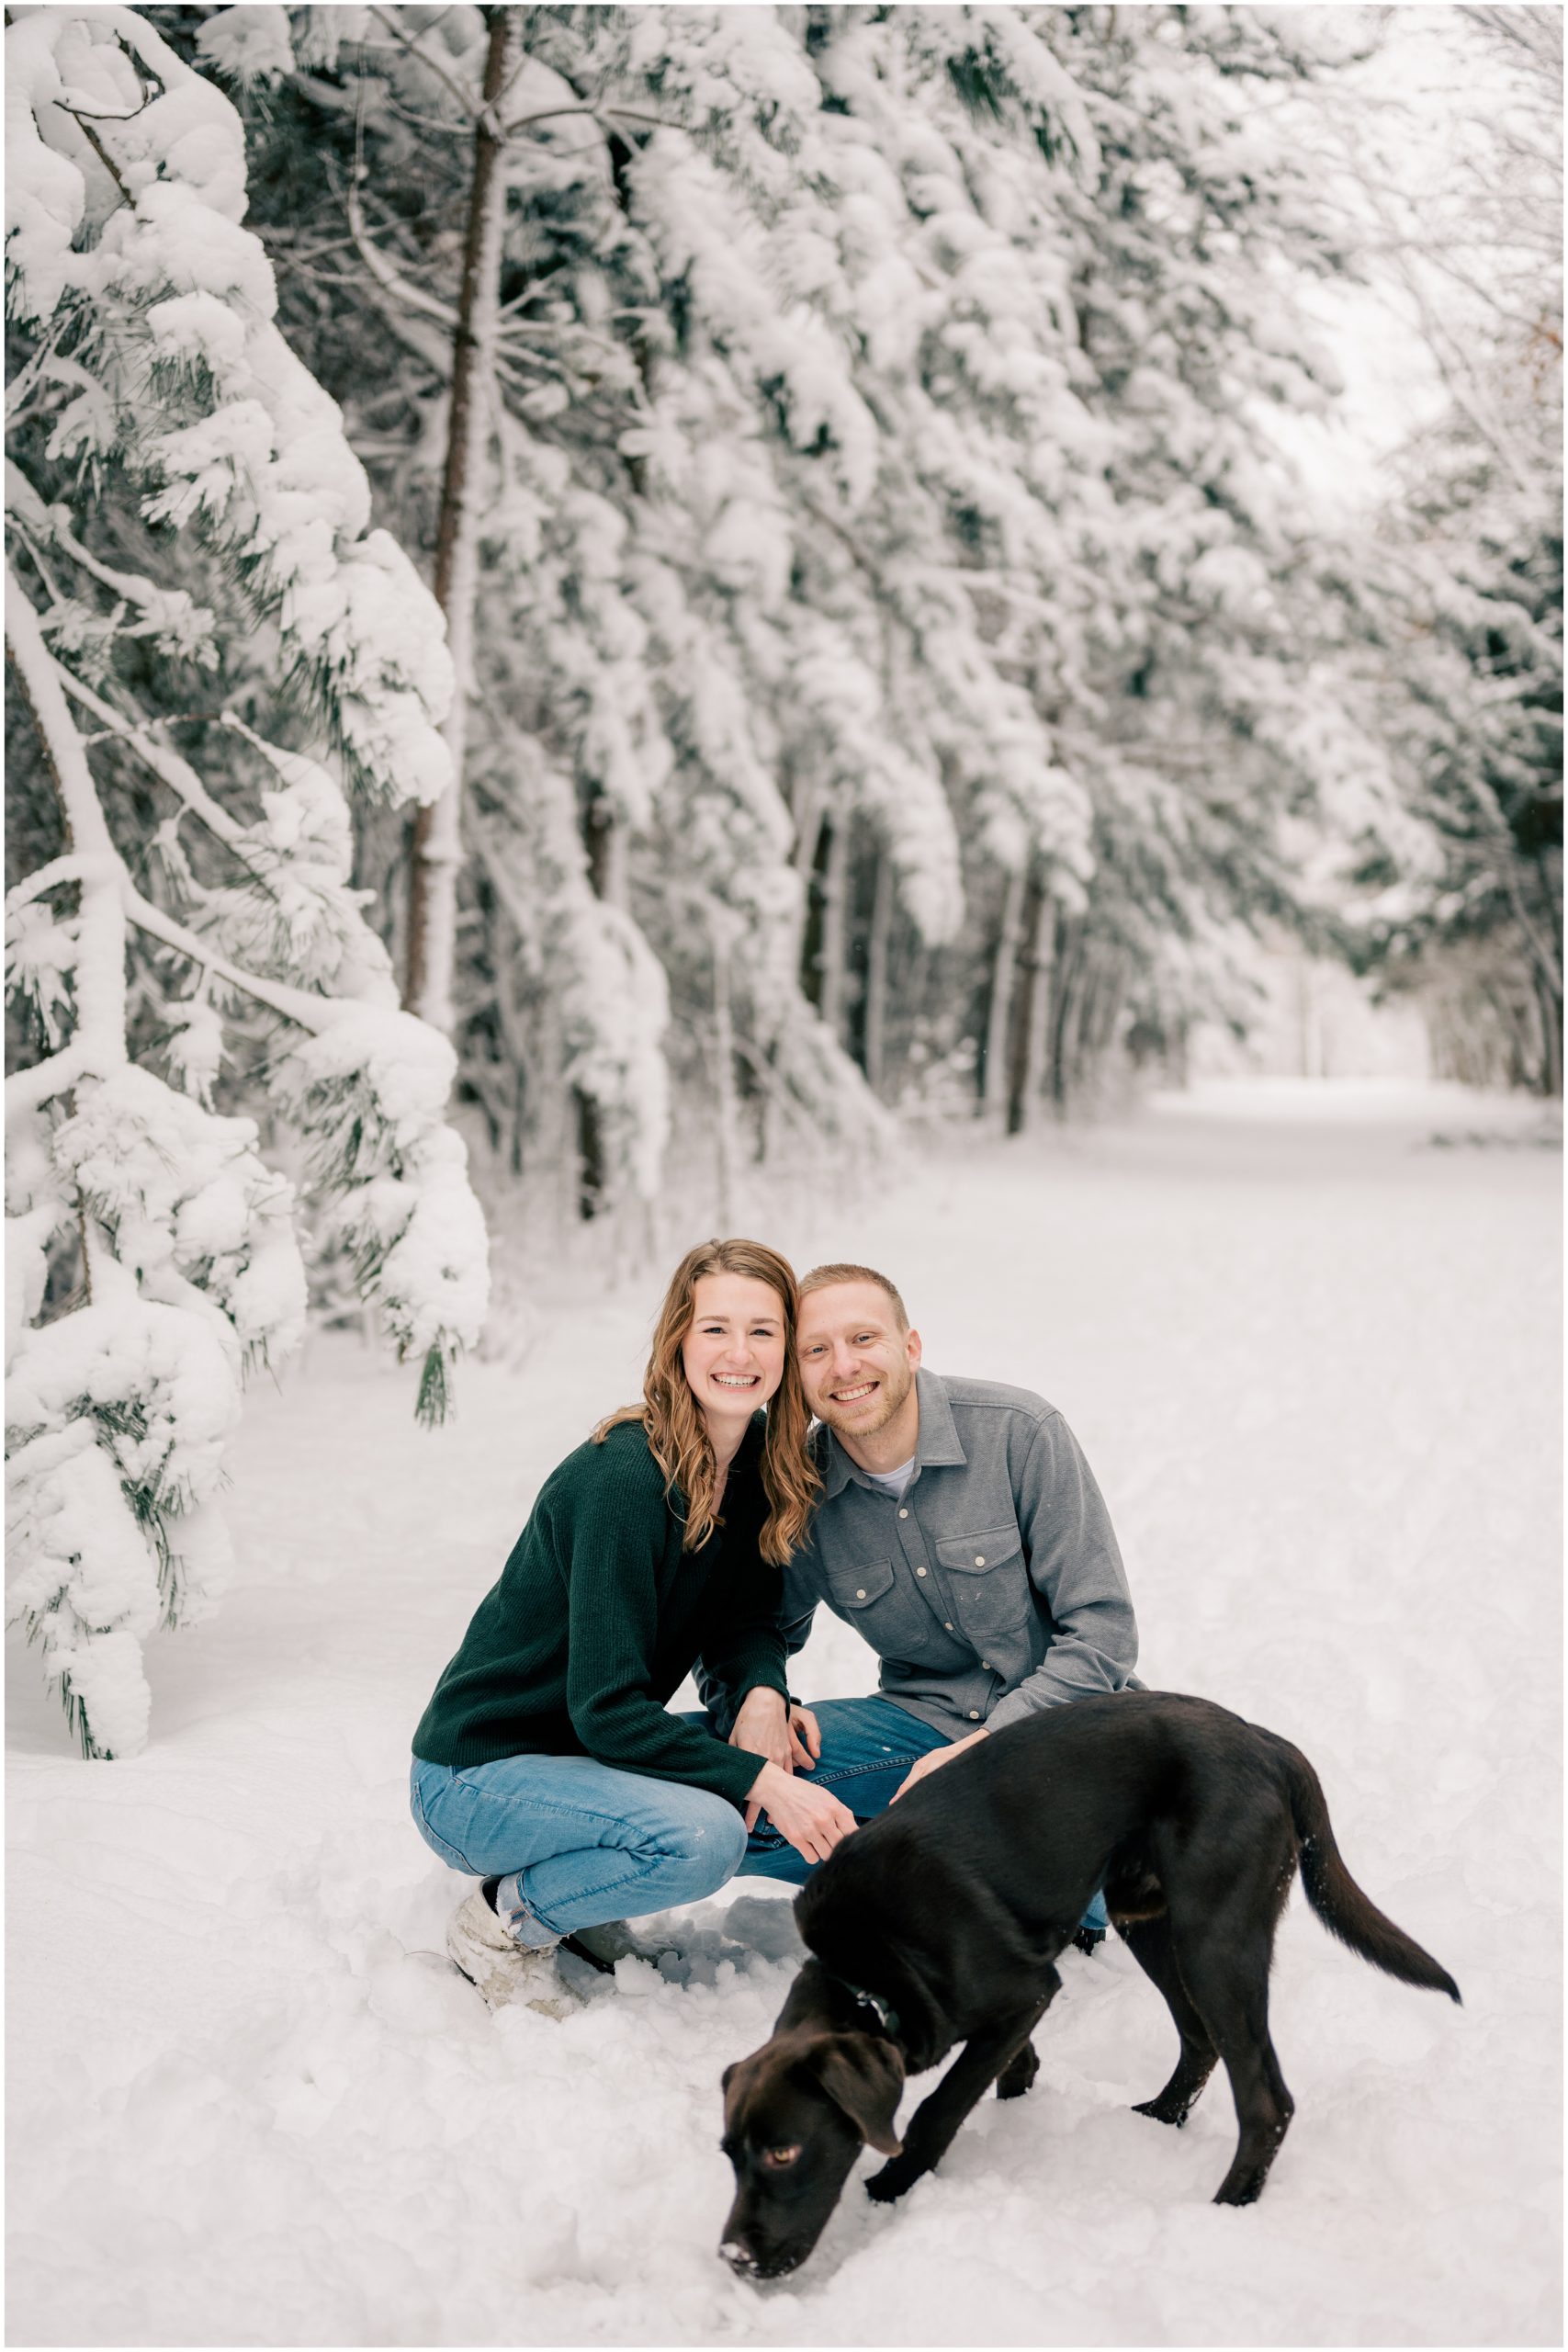 Winter couple's session in the snow